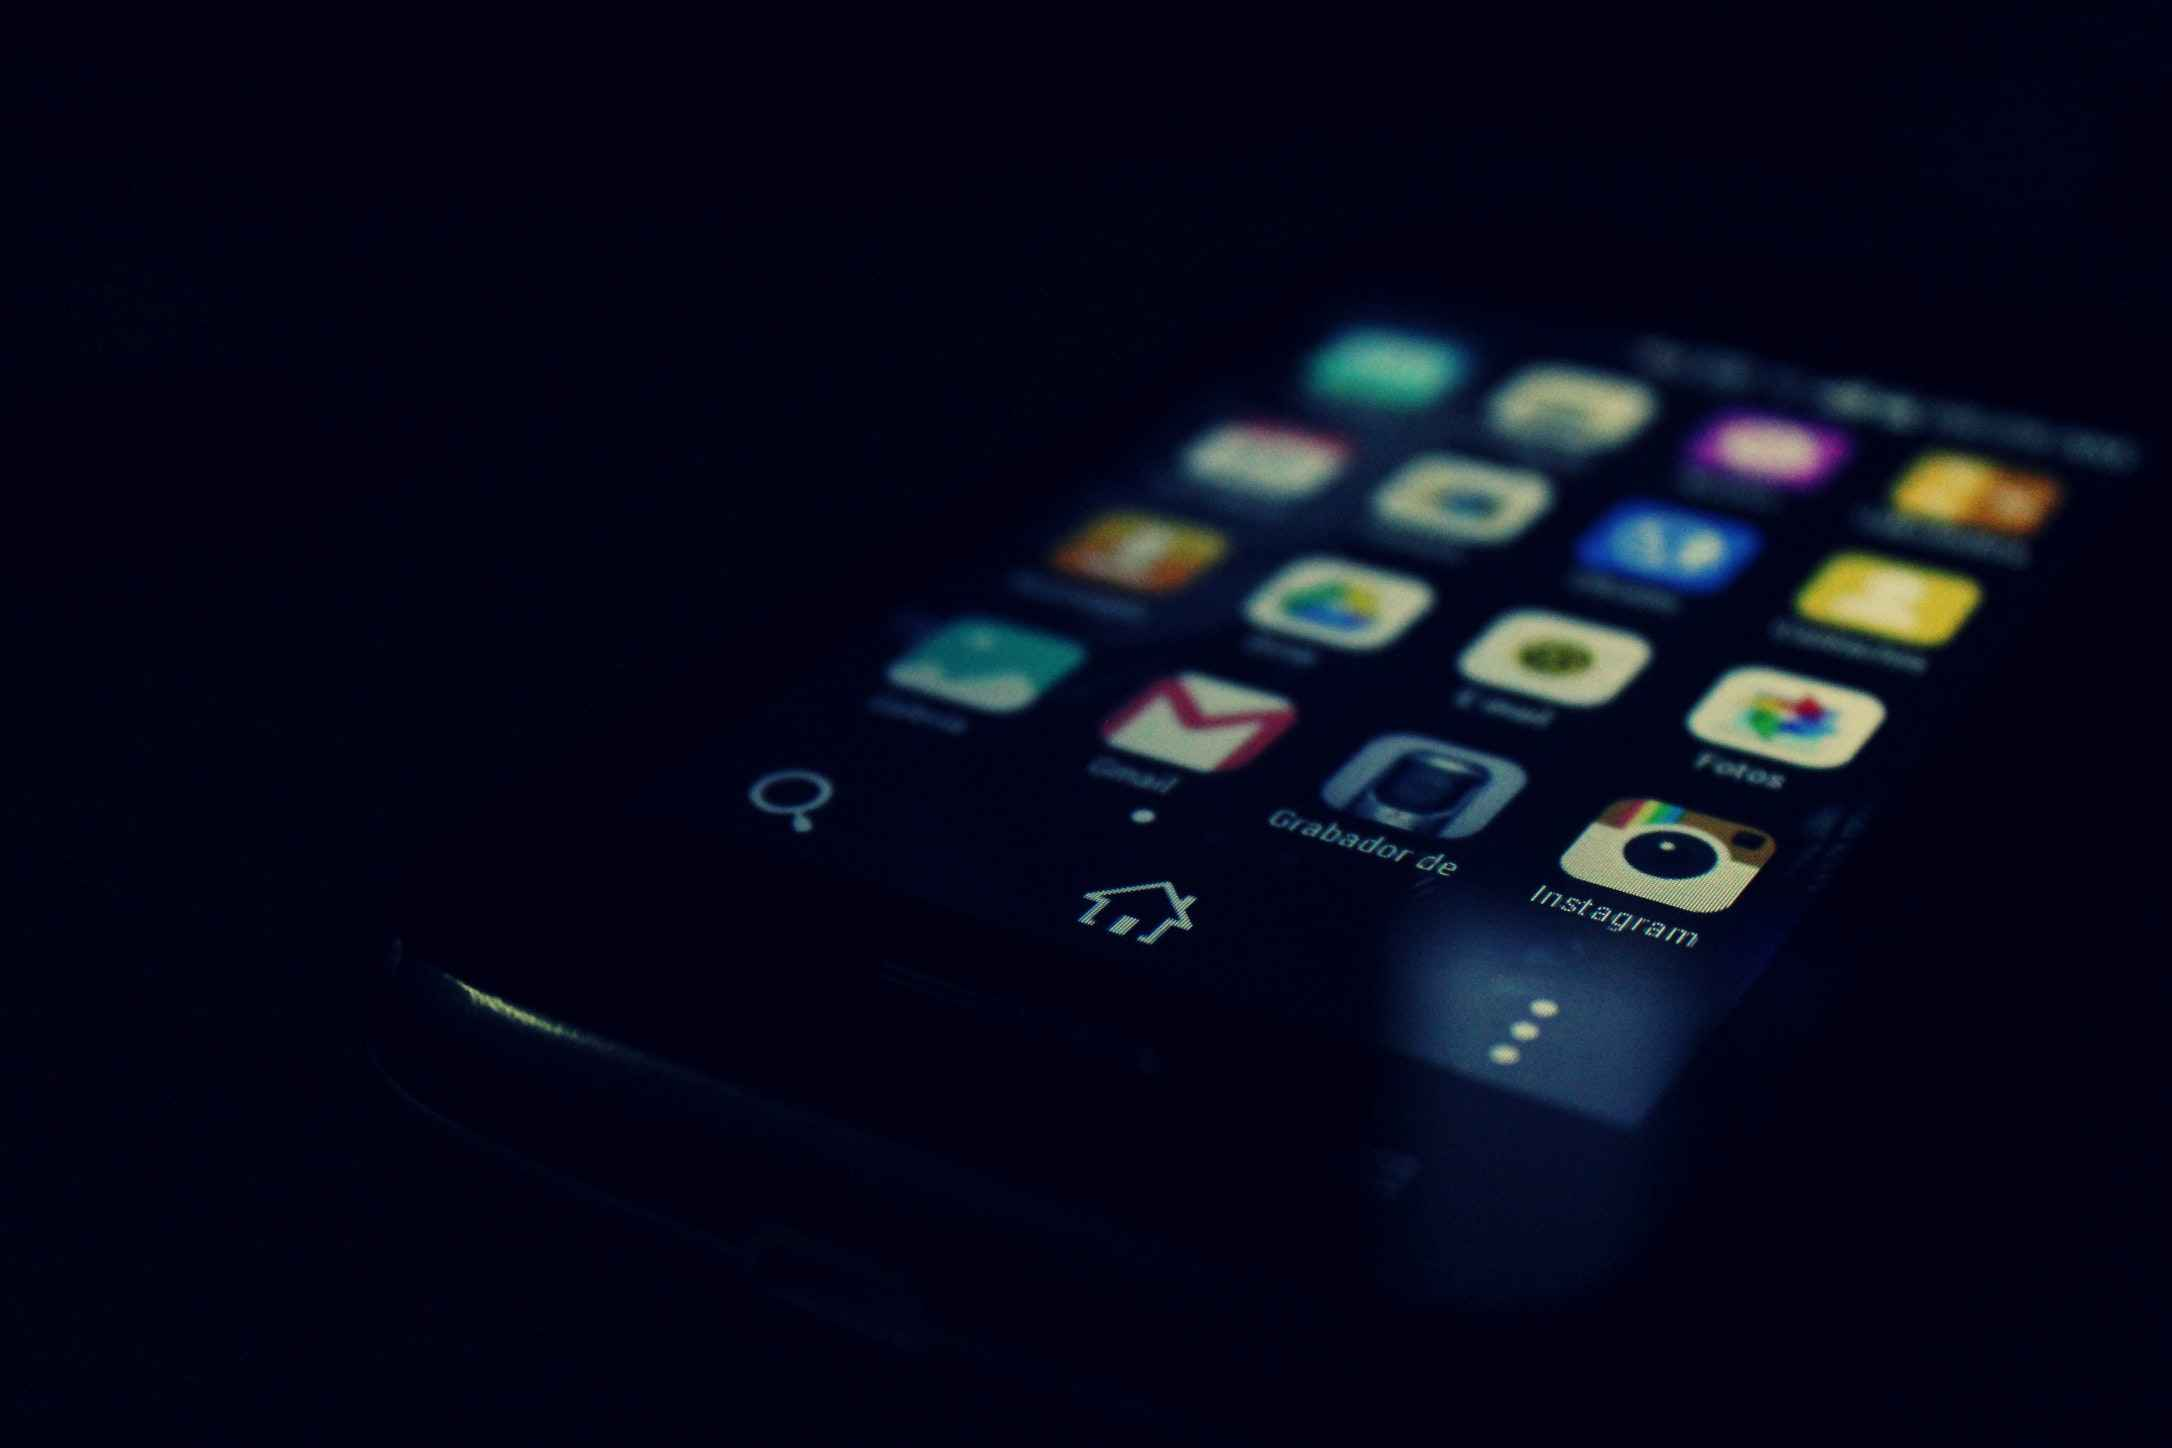 Troubleshooting Guide: How to Fix an Android Phone with a Black Screen but Still Powered On